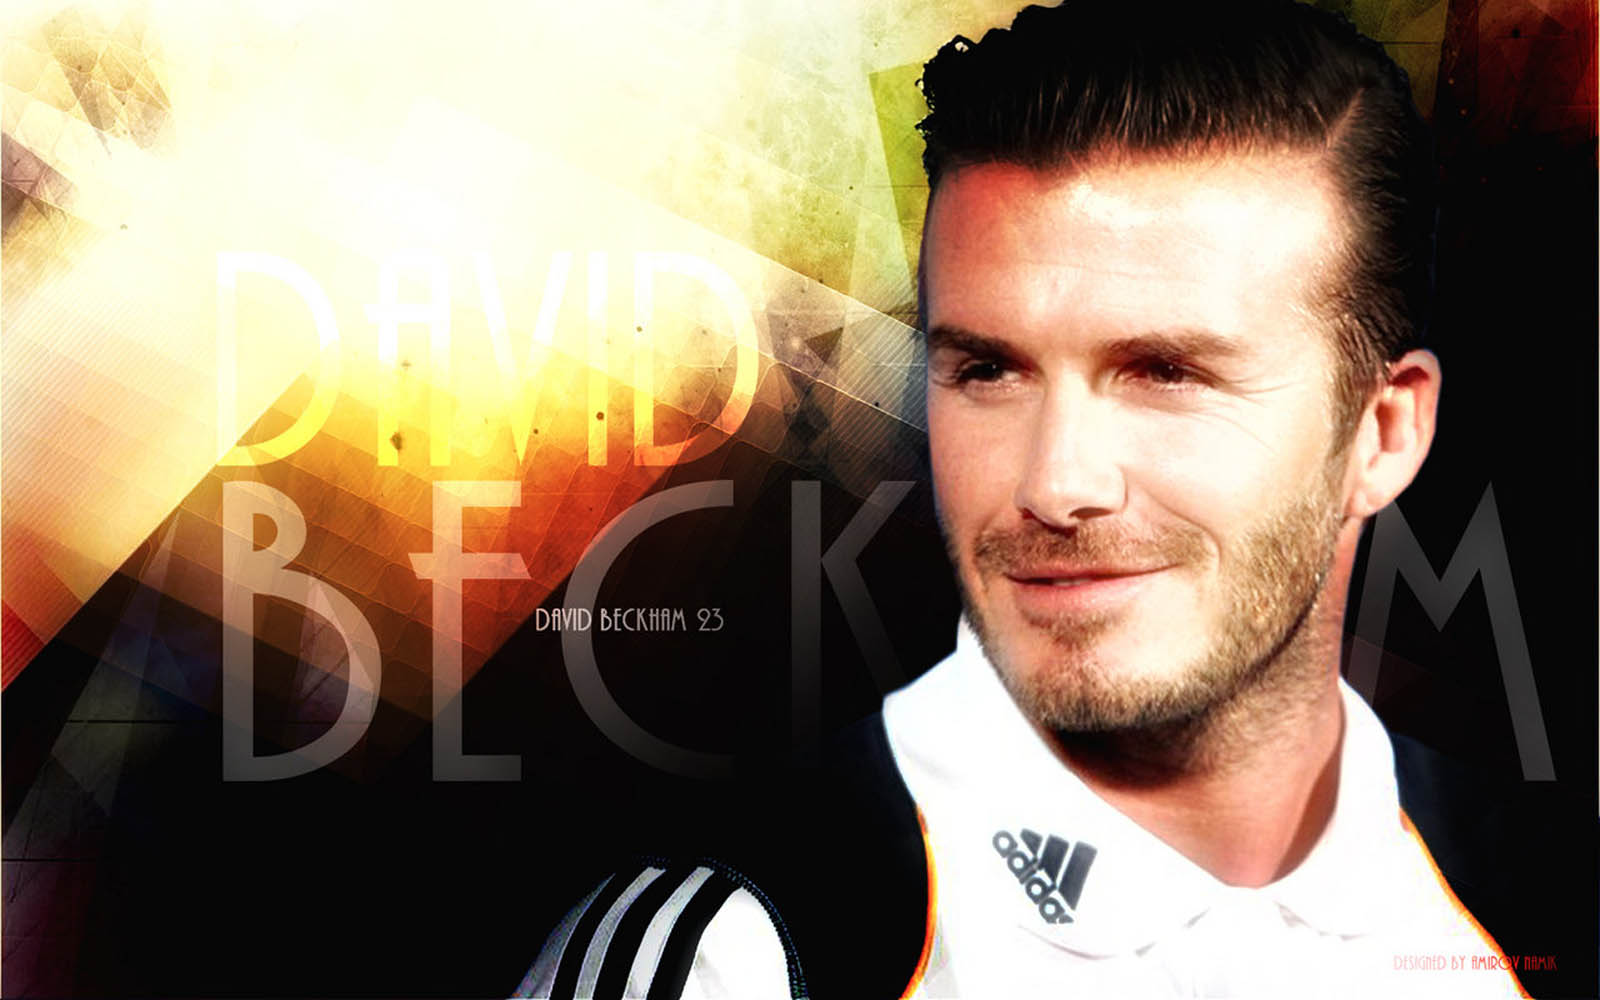 Tag David Beckham Wallpaper Background Paos Image And Pictures